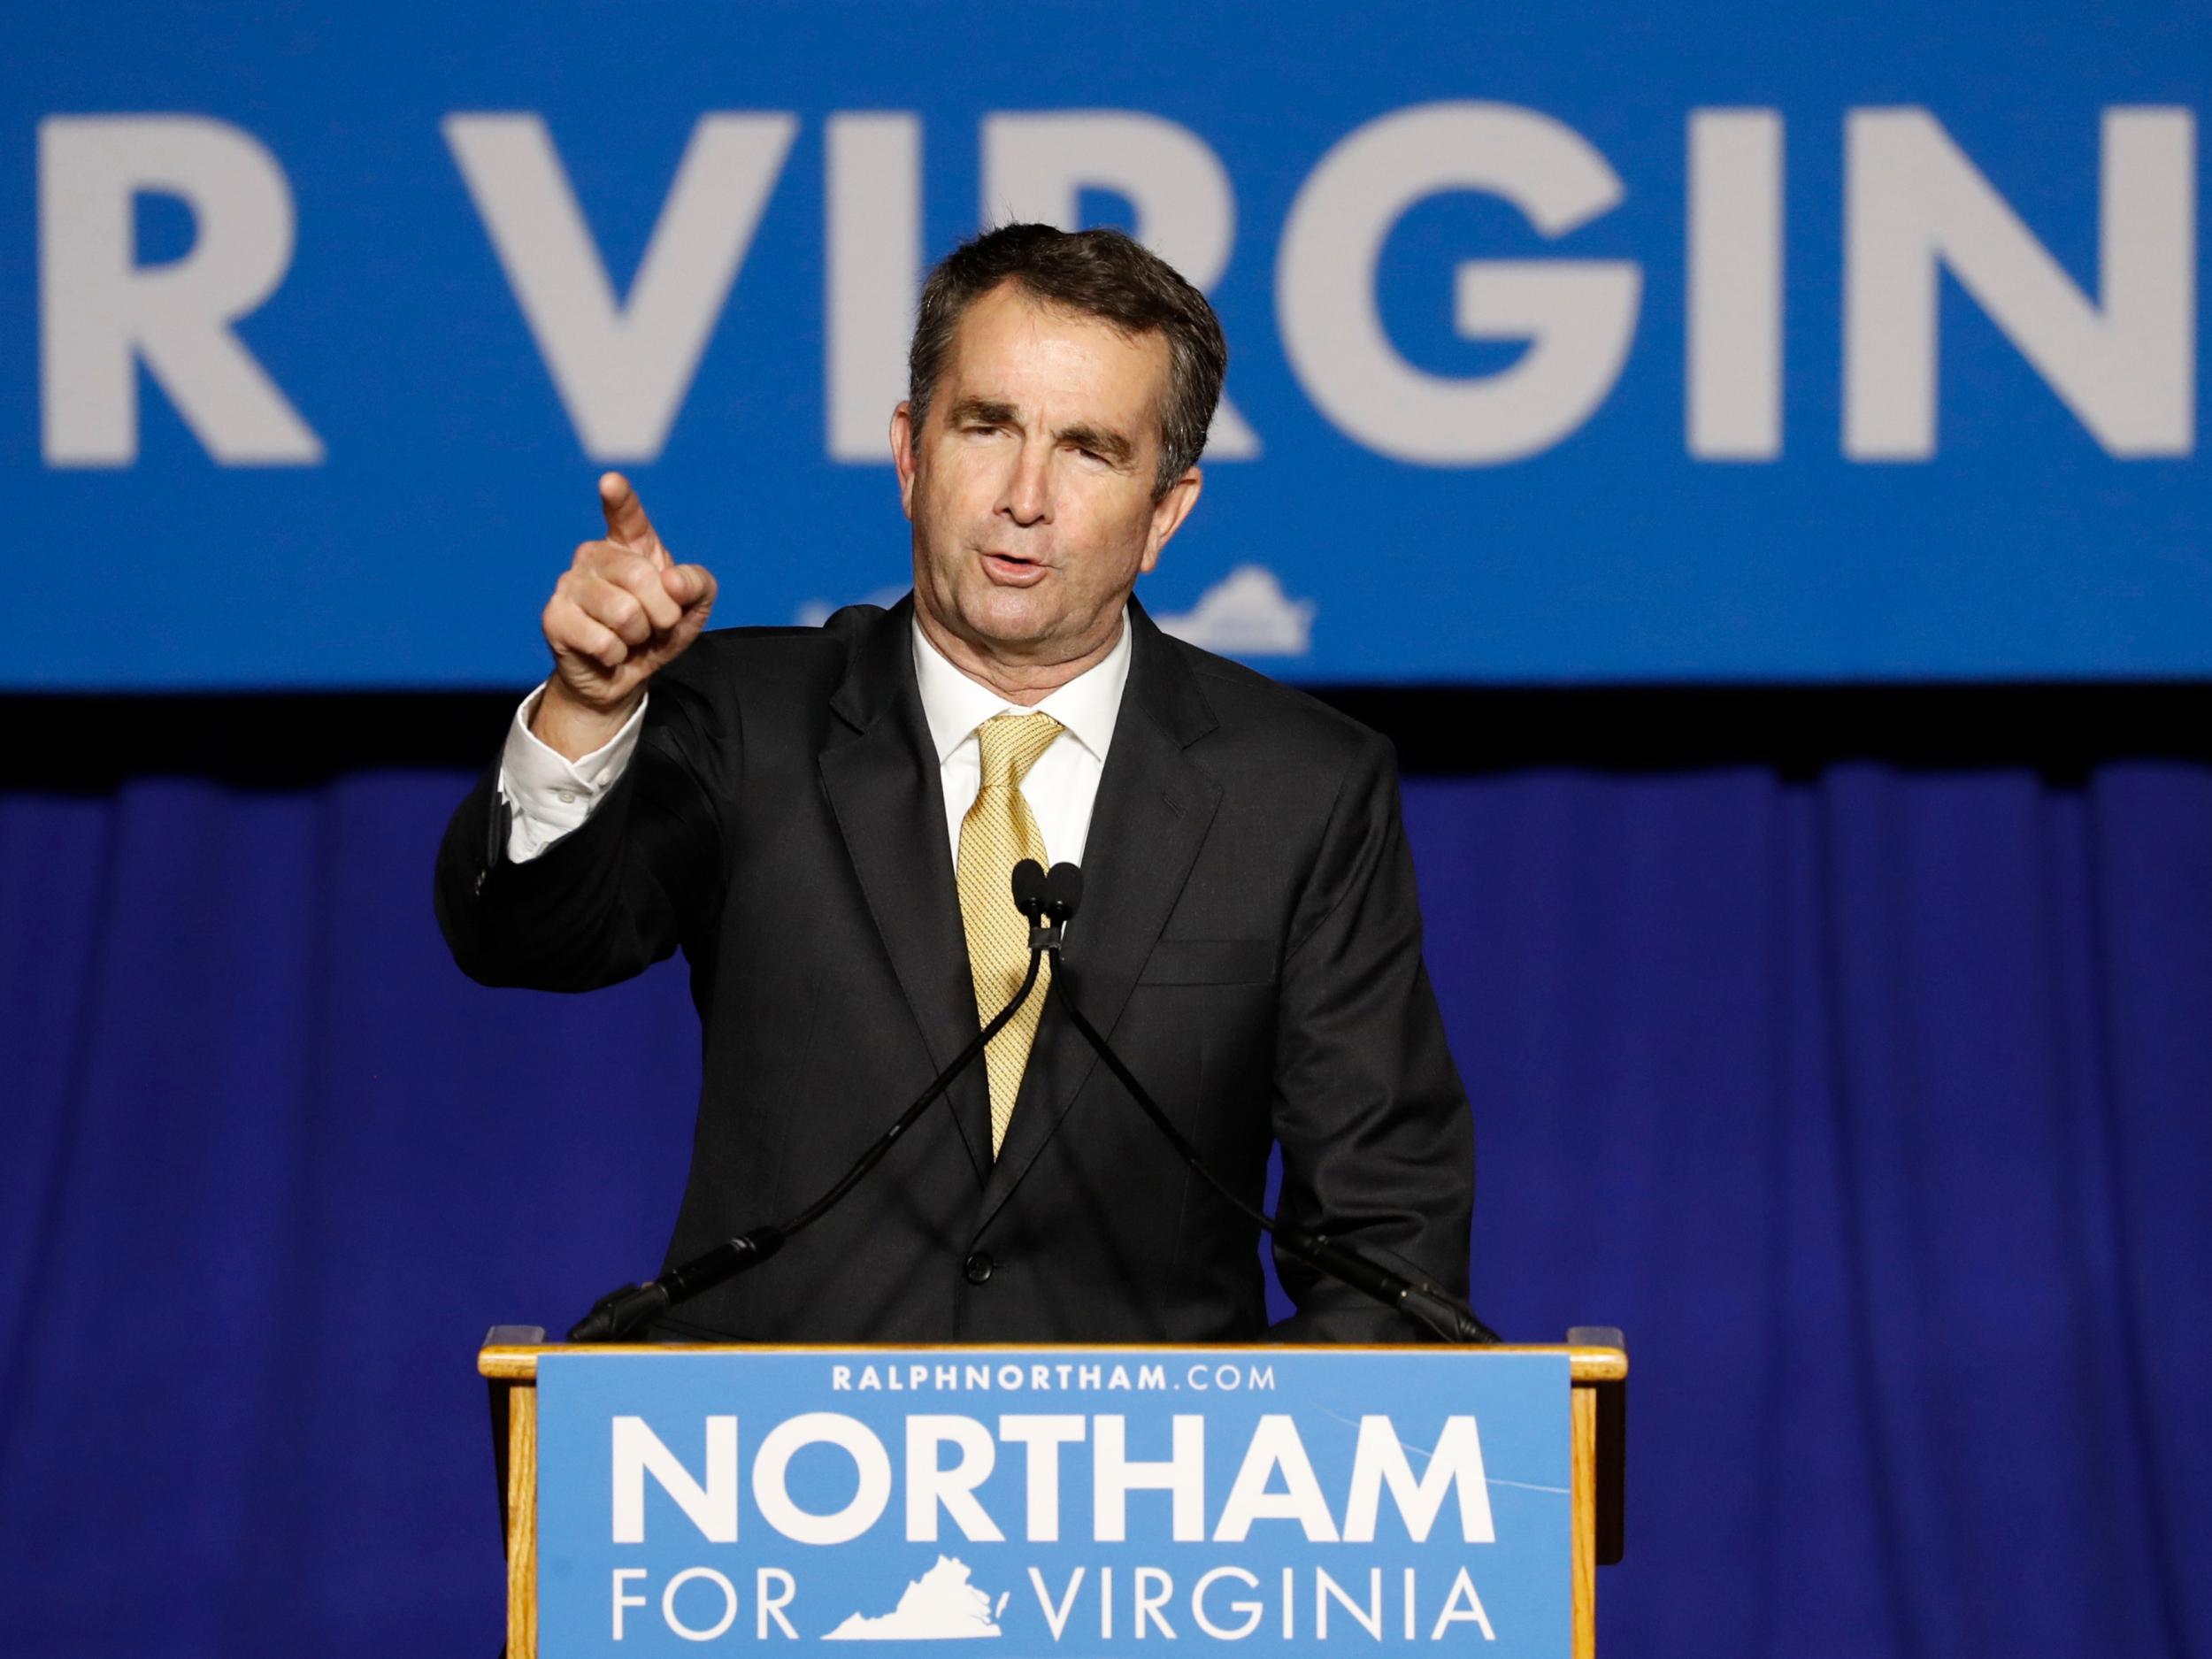 Democratic candidate for governor Ralph Northam speaks after his election night victory at the campus of George Mason University in Fairfax